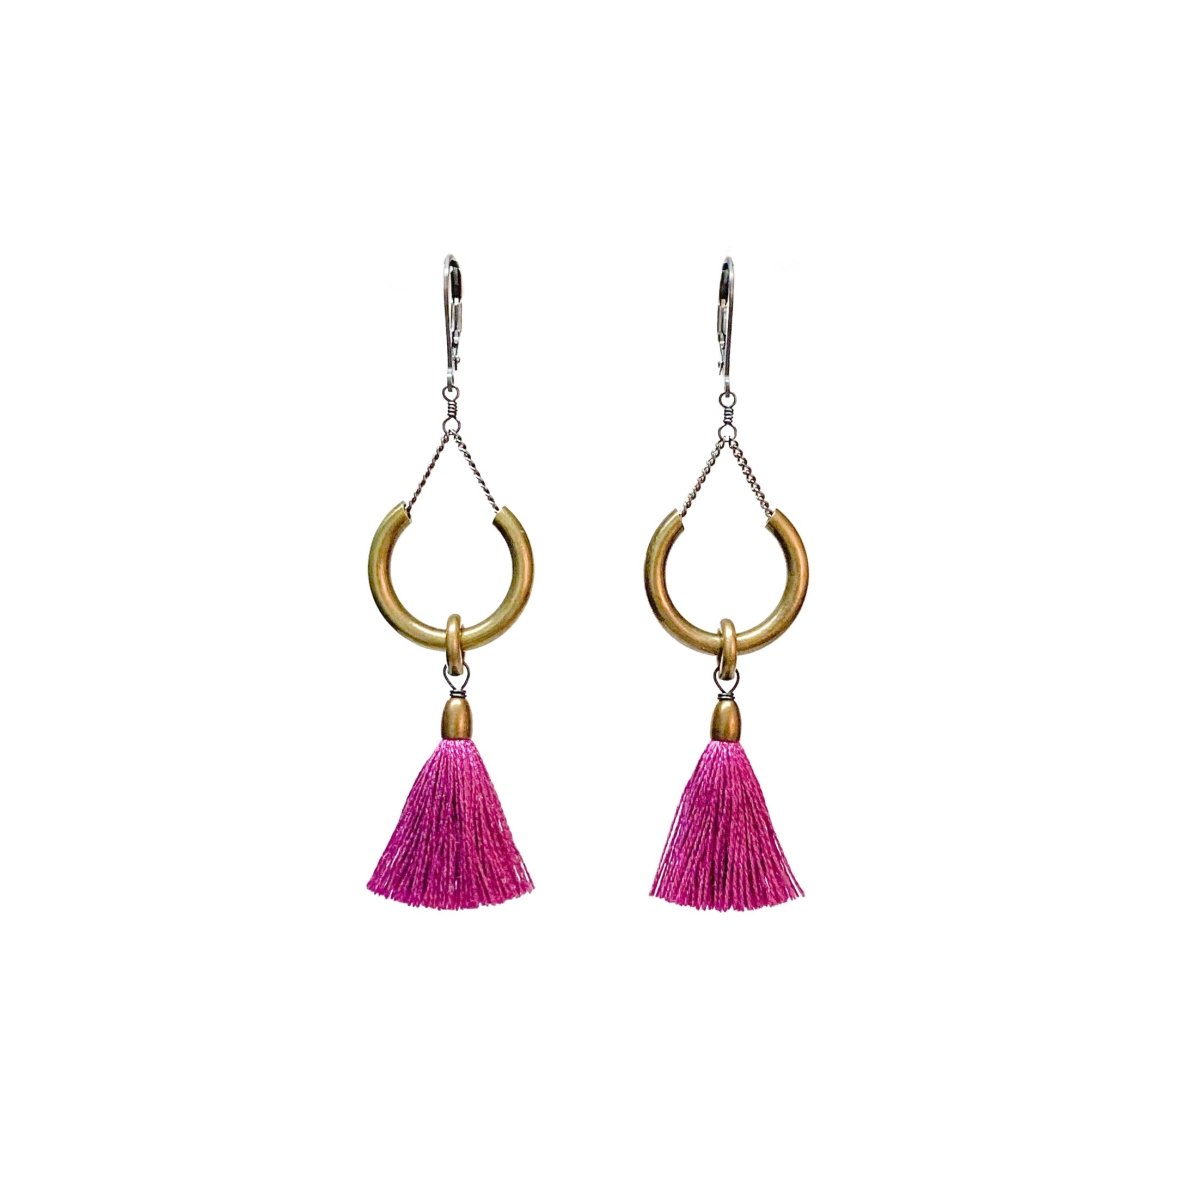 A pair of earrings with silver clasps, a brass ring and fuchsia tassels. The Duster Earrings in Hot Violet are from Portland designer Emily Bixler of BOET. 